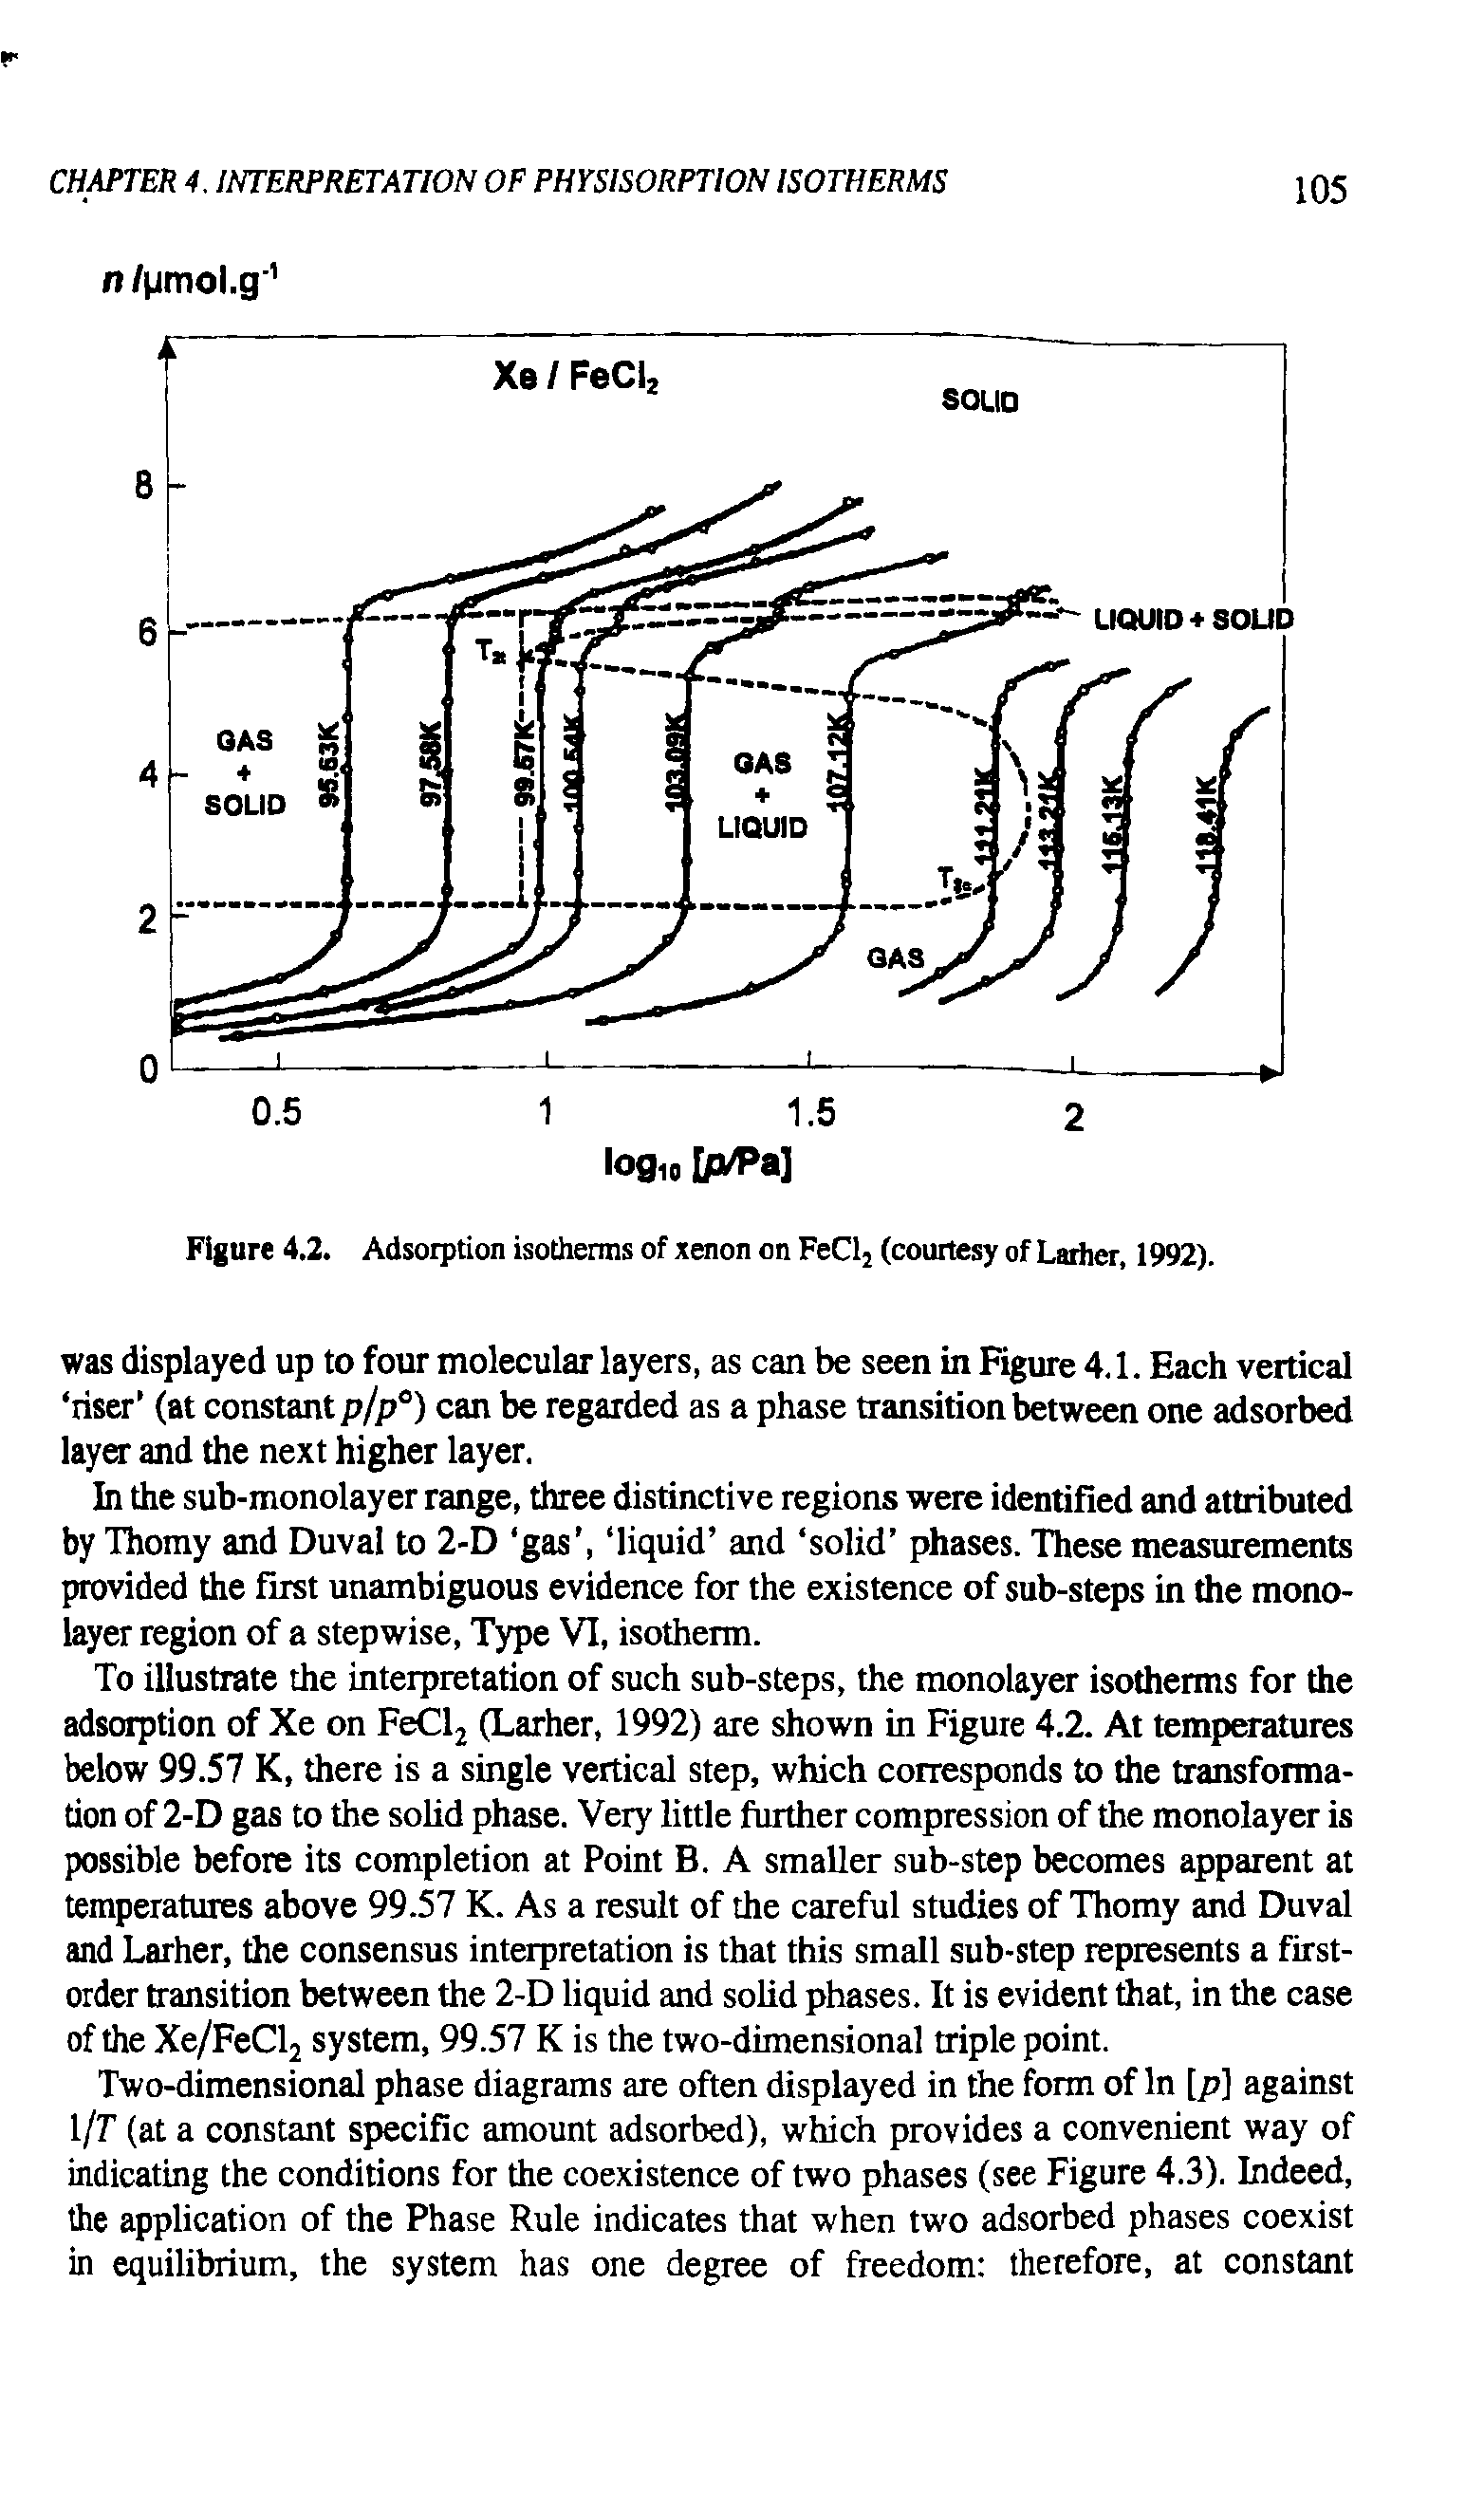 Figure 4.2. Adsorption isotherms of xenon on FeCl2 (courtesy of Larher, 1992).